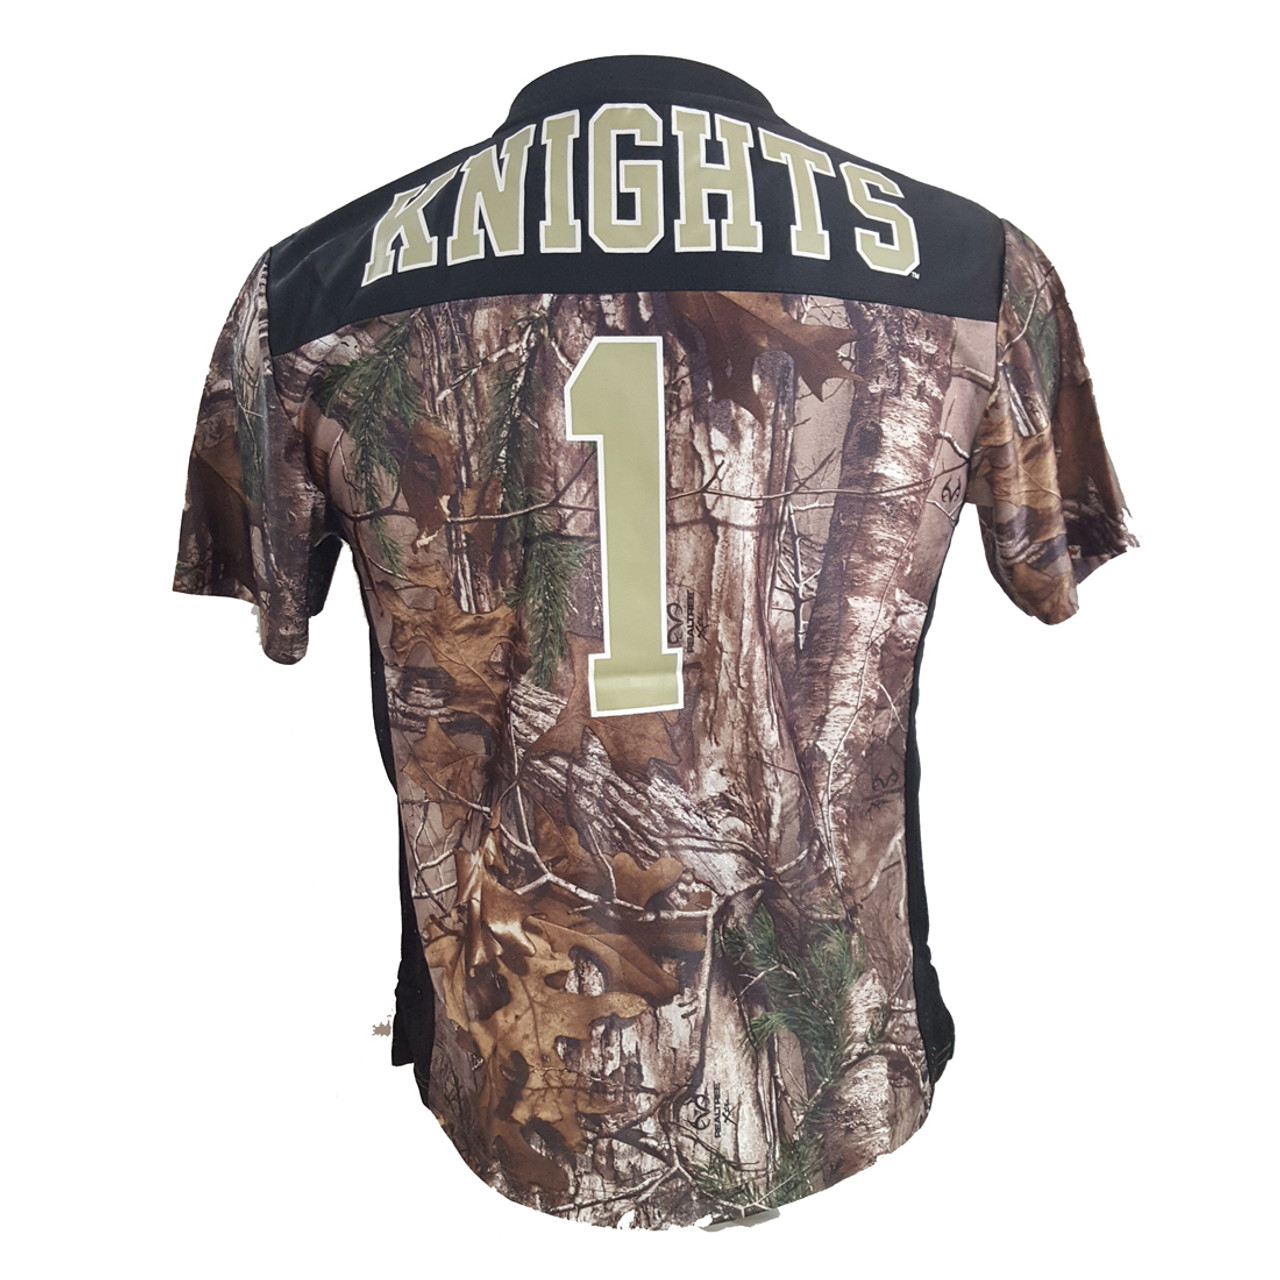 Earthletics Youth Realtree Xtra Camouflage College Football Screen Printed Jersey, UCF, M, Size: Medium, Gray